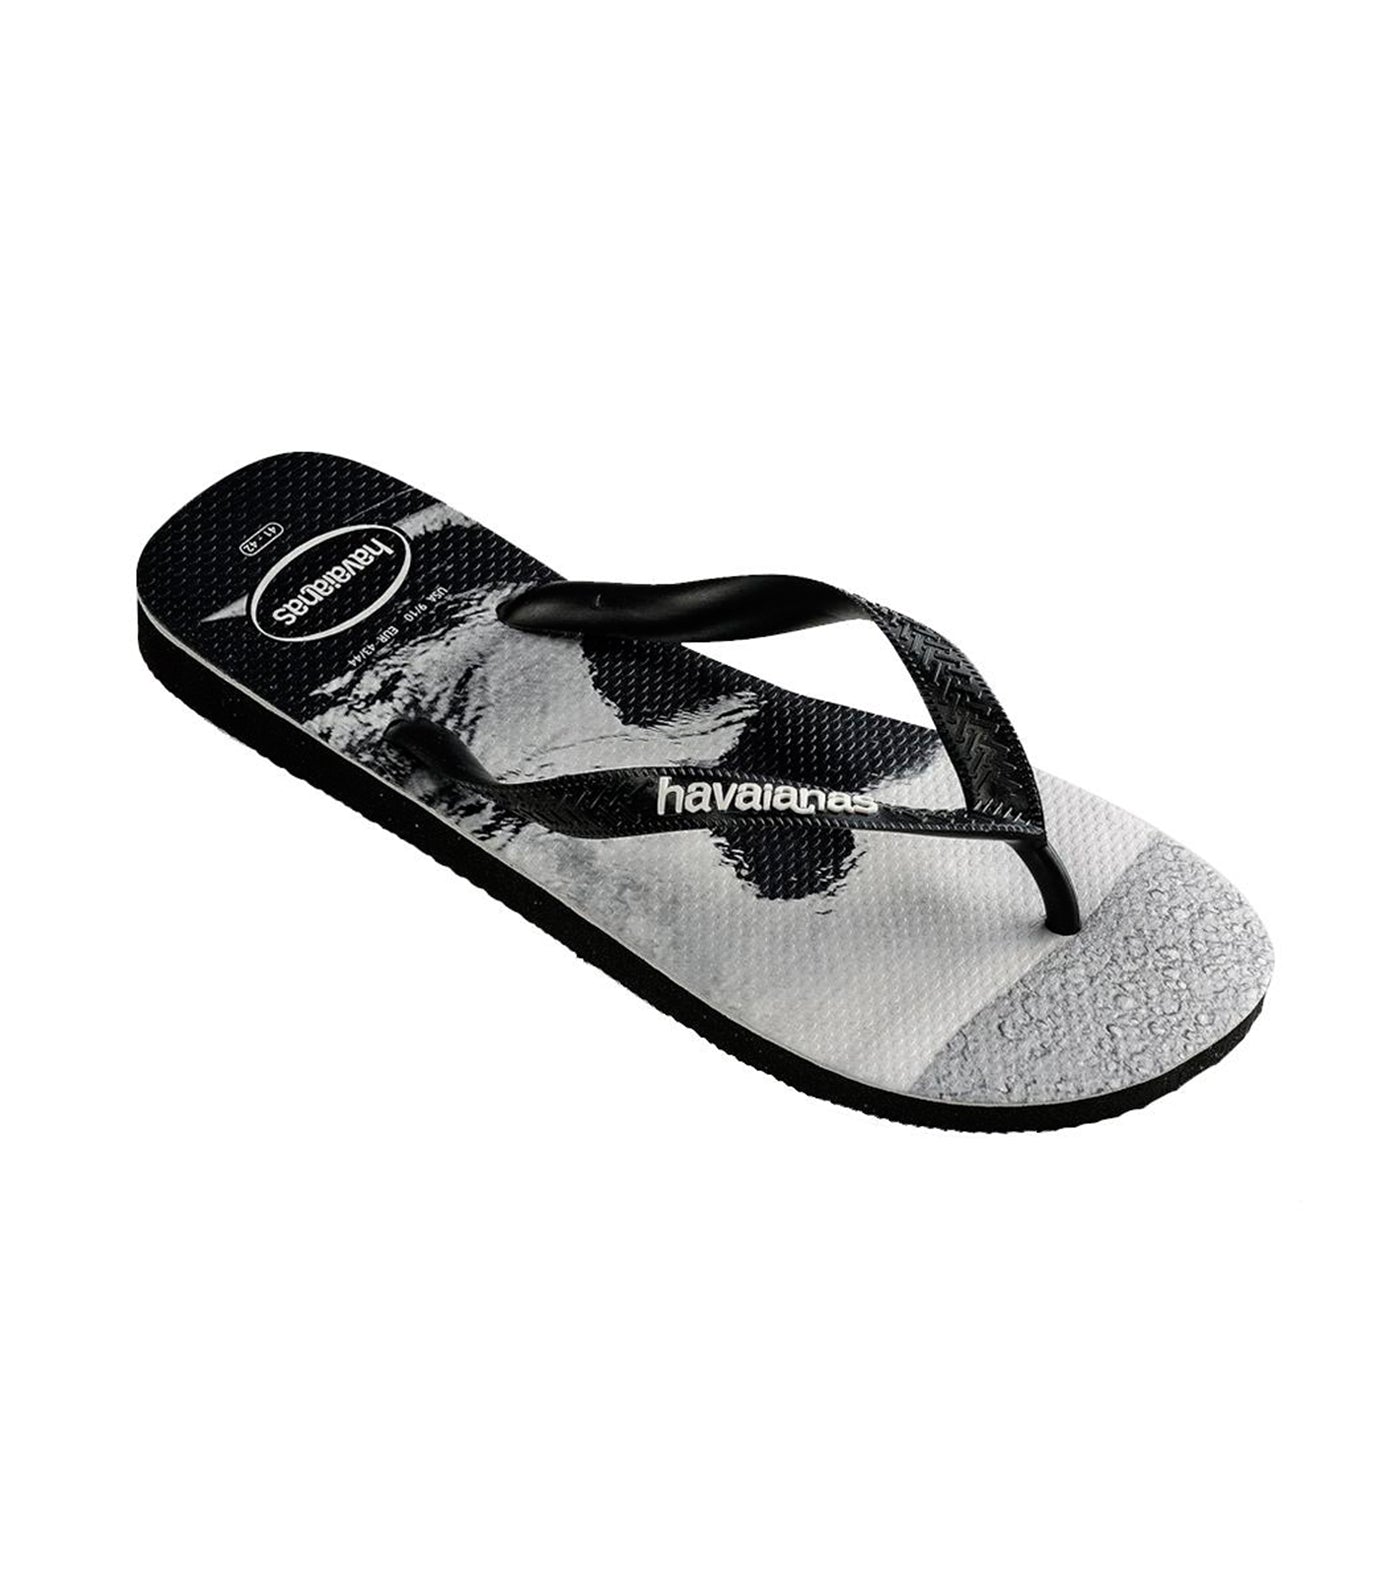 Havaianas Men's Top Photoprint Black and White